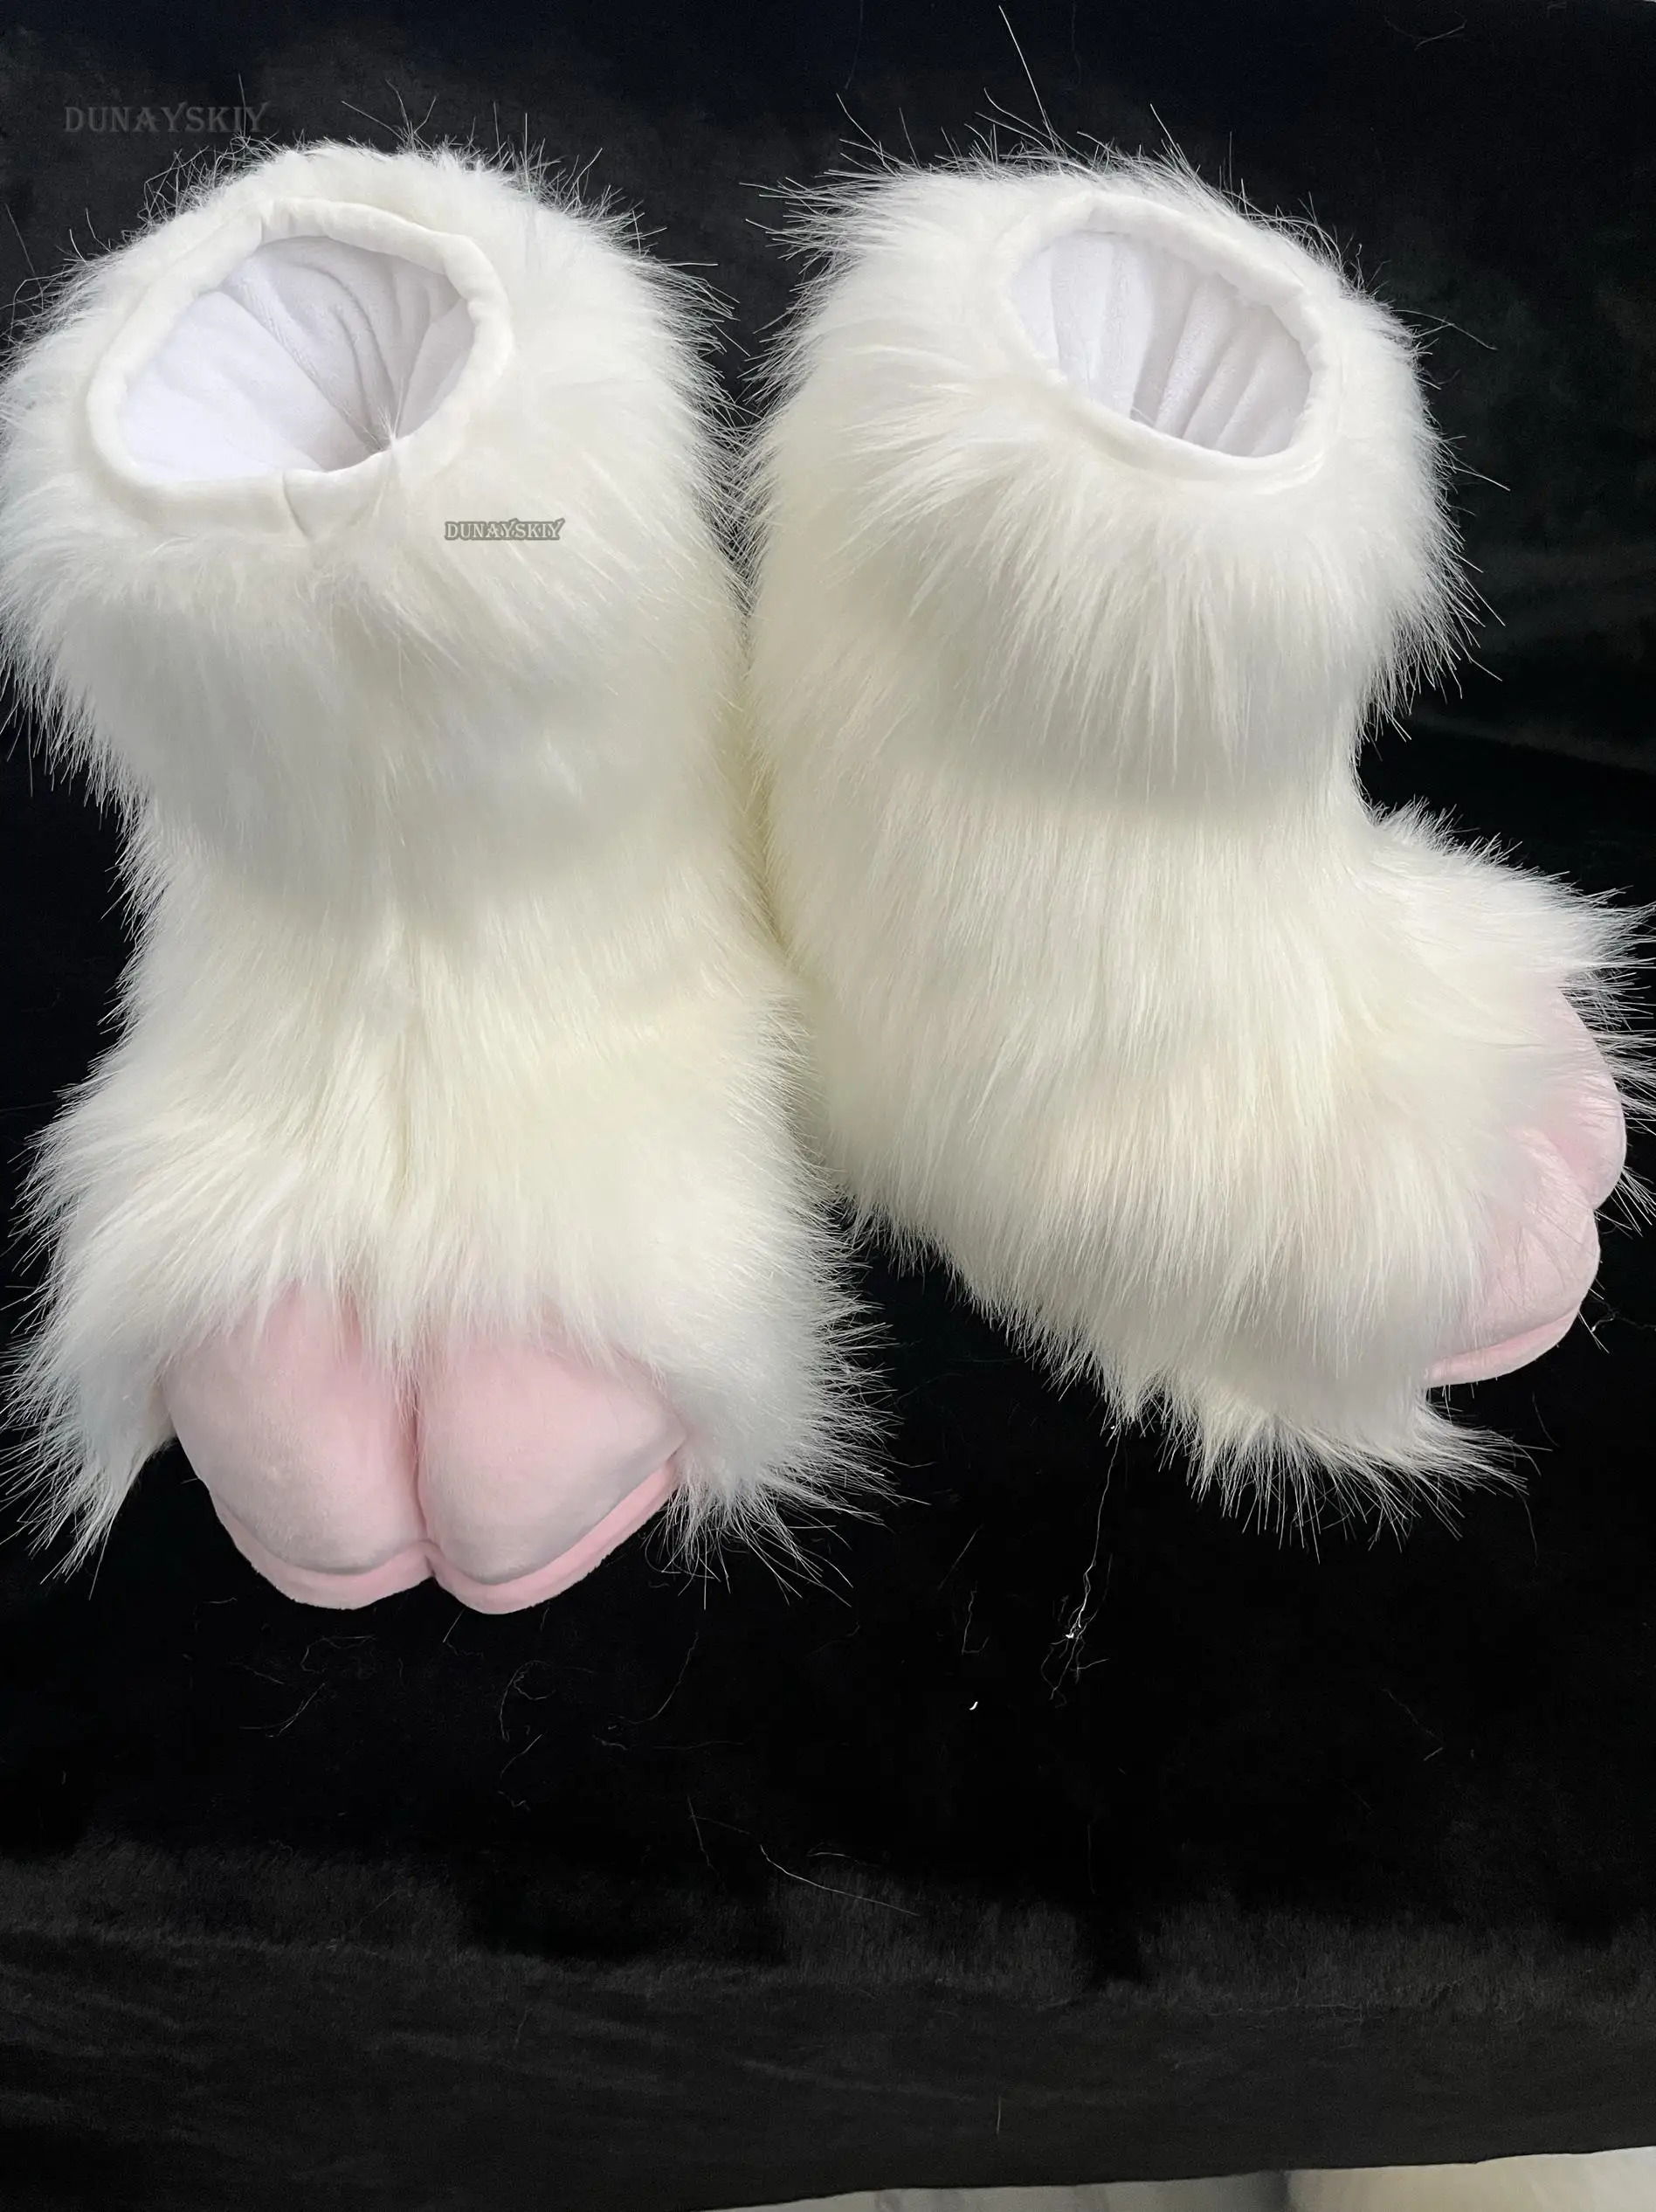 

Fursuit Cosplay Paw Sheep Shoes Accessories Furry Rubbit Goats Boots Cute Fluffy Animal Manga Party Cos Wearable Unisex Costume